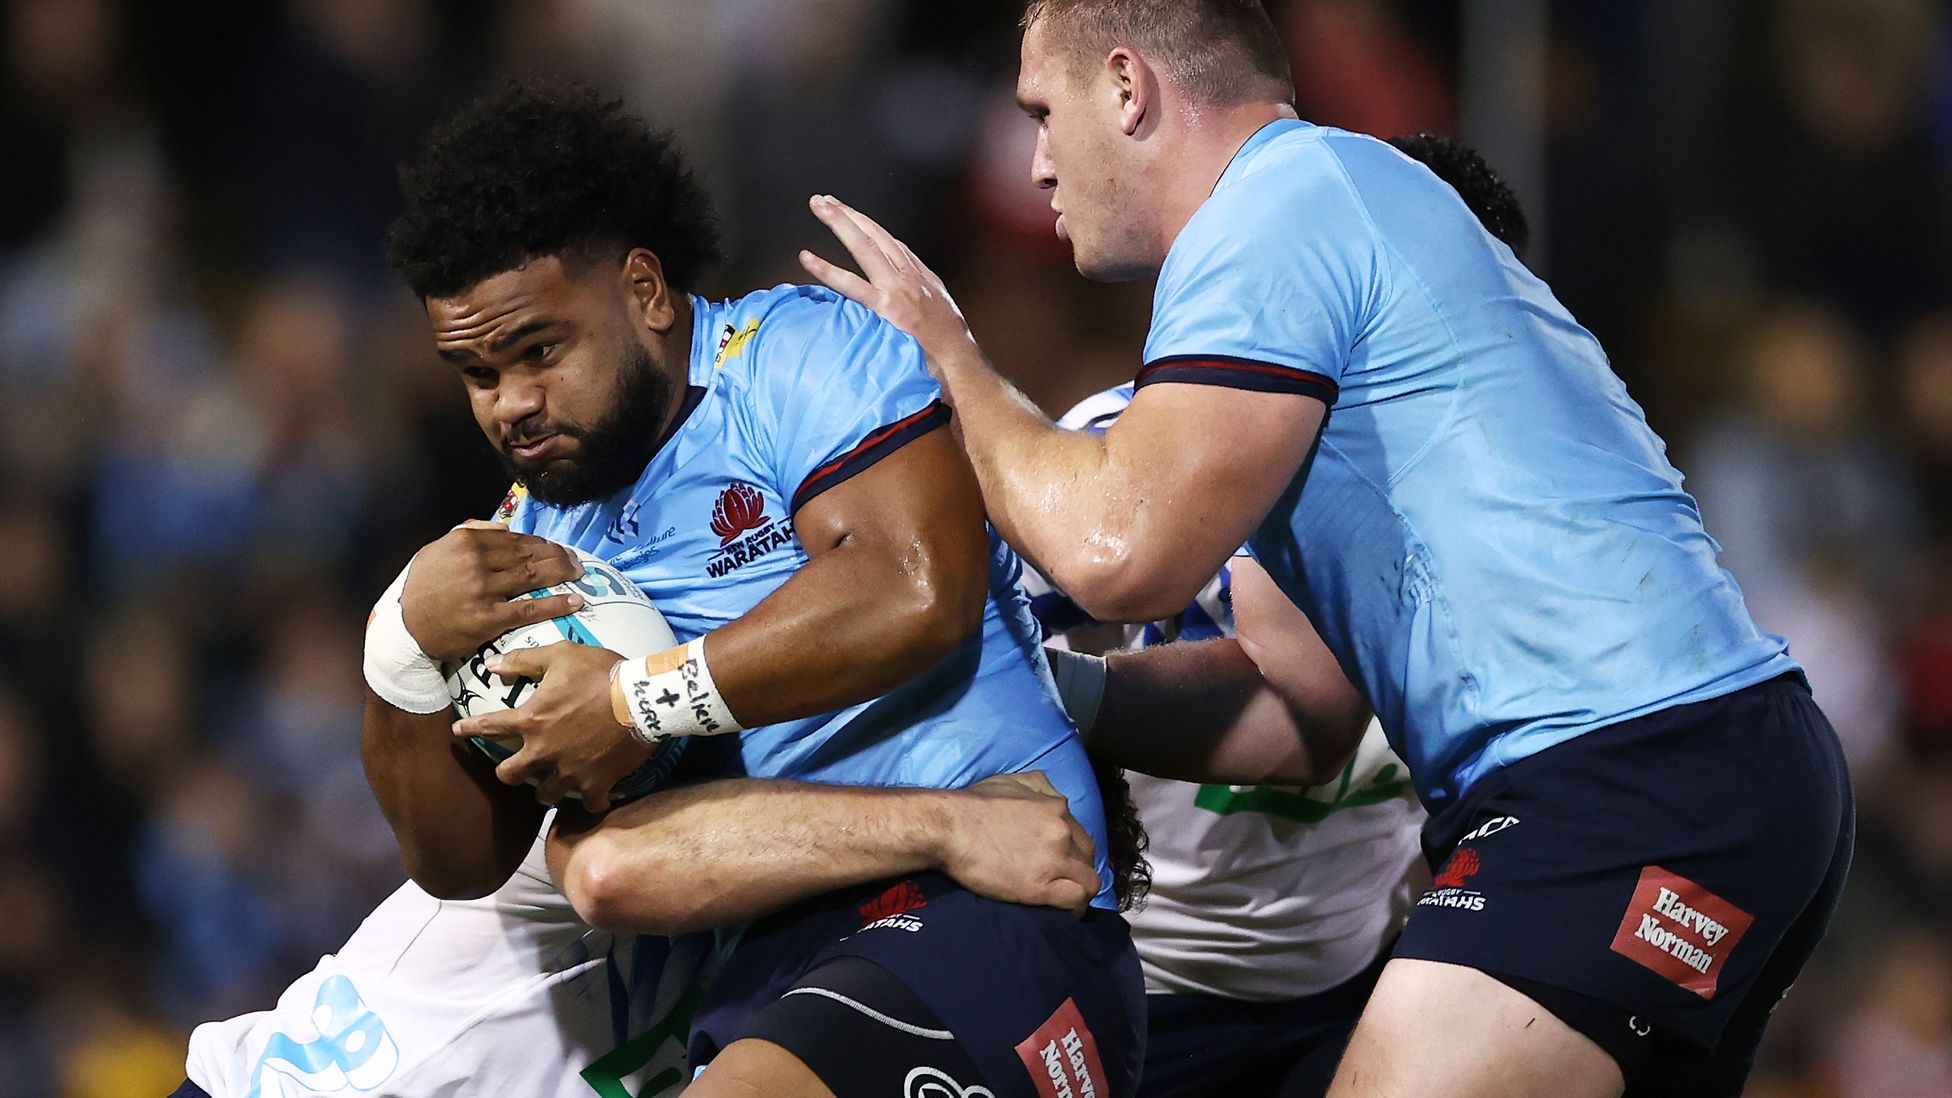 Mahe Vailanu of the Waratahs is tackled during the round 15 Super Rugby Pacific match between the NSW Waratahs and the Blues at Leichhardt Oval.